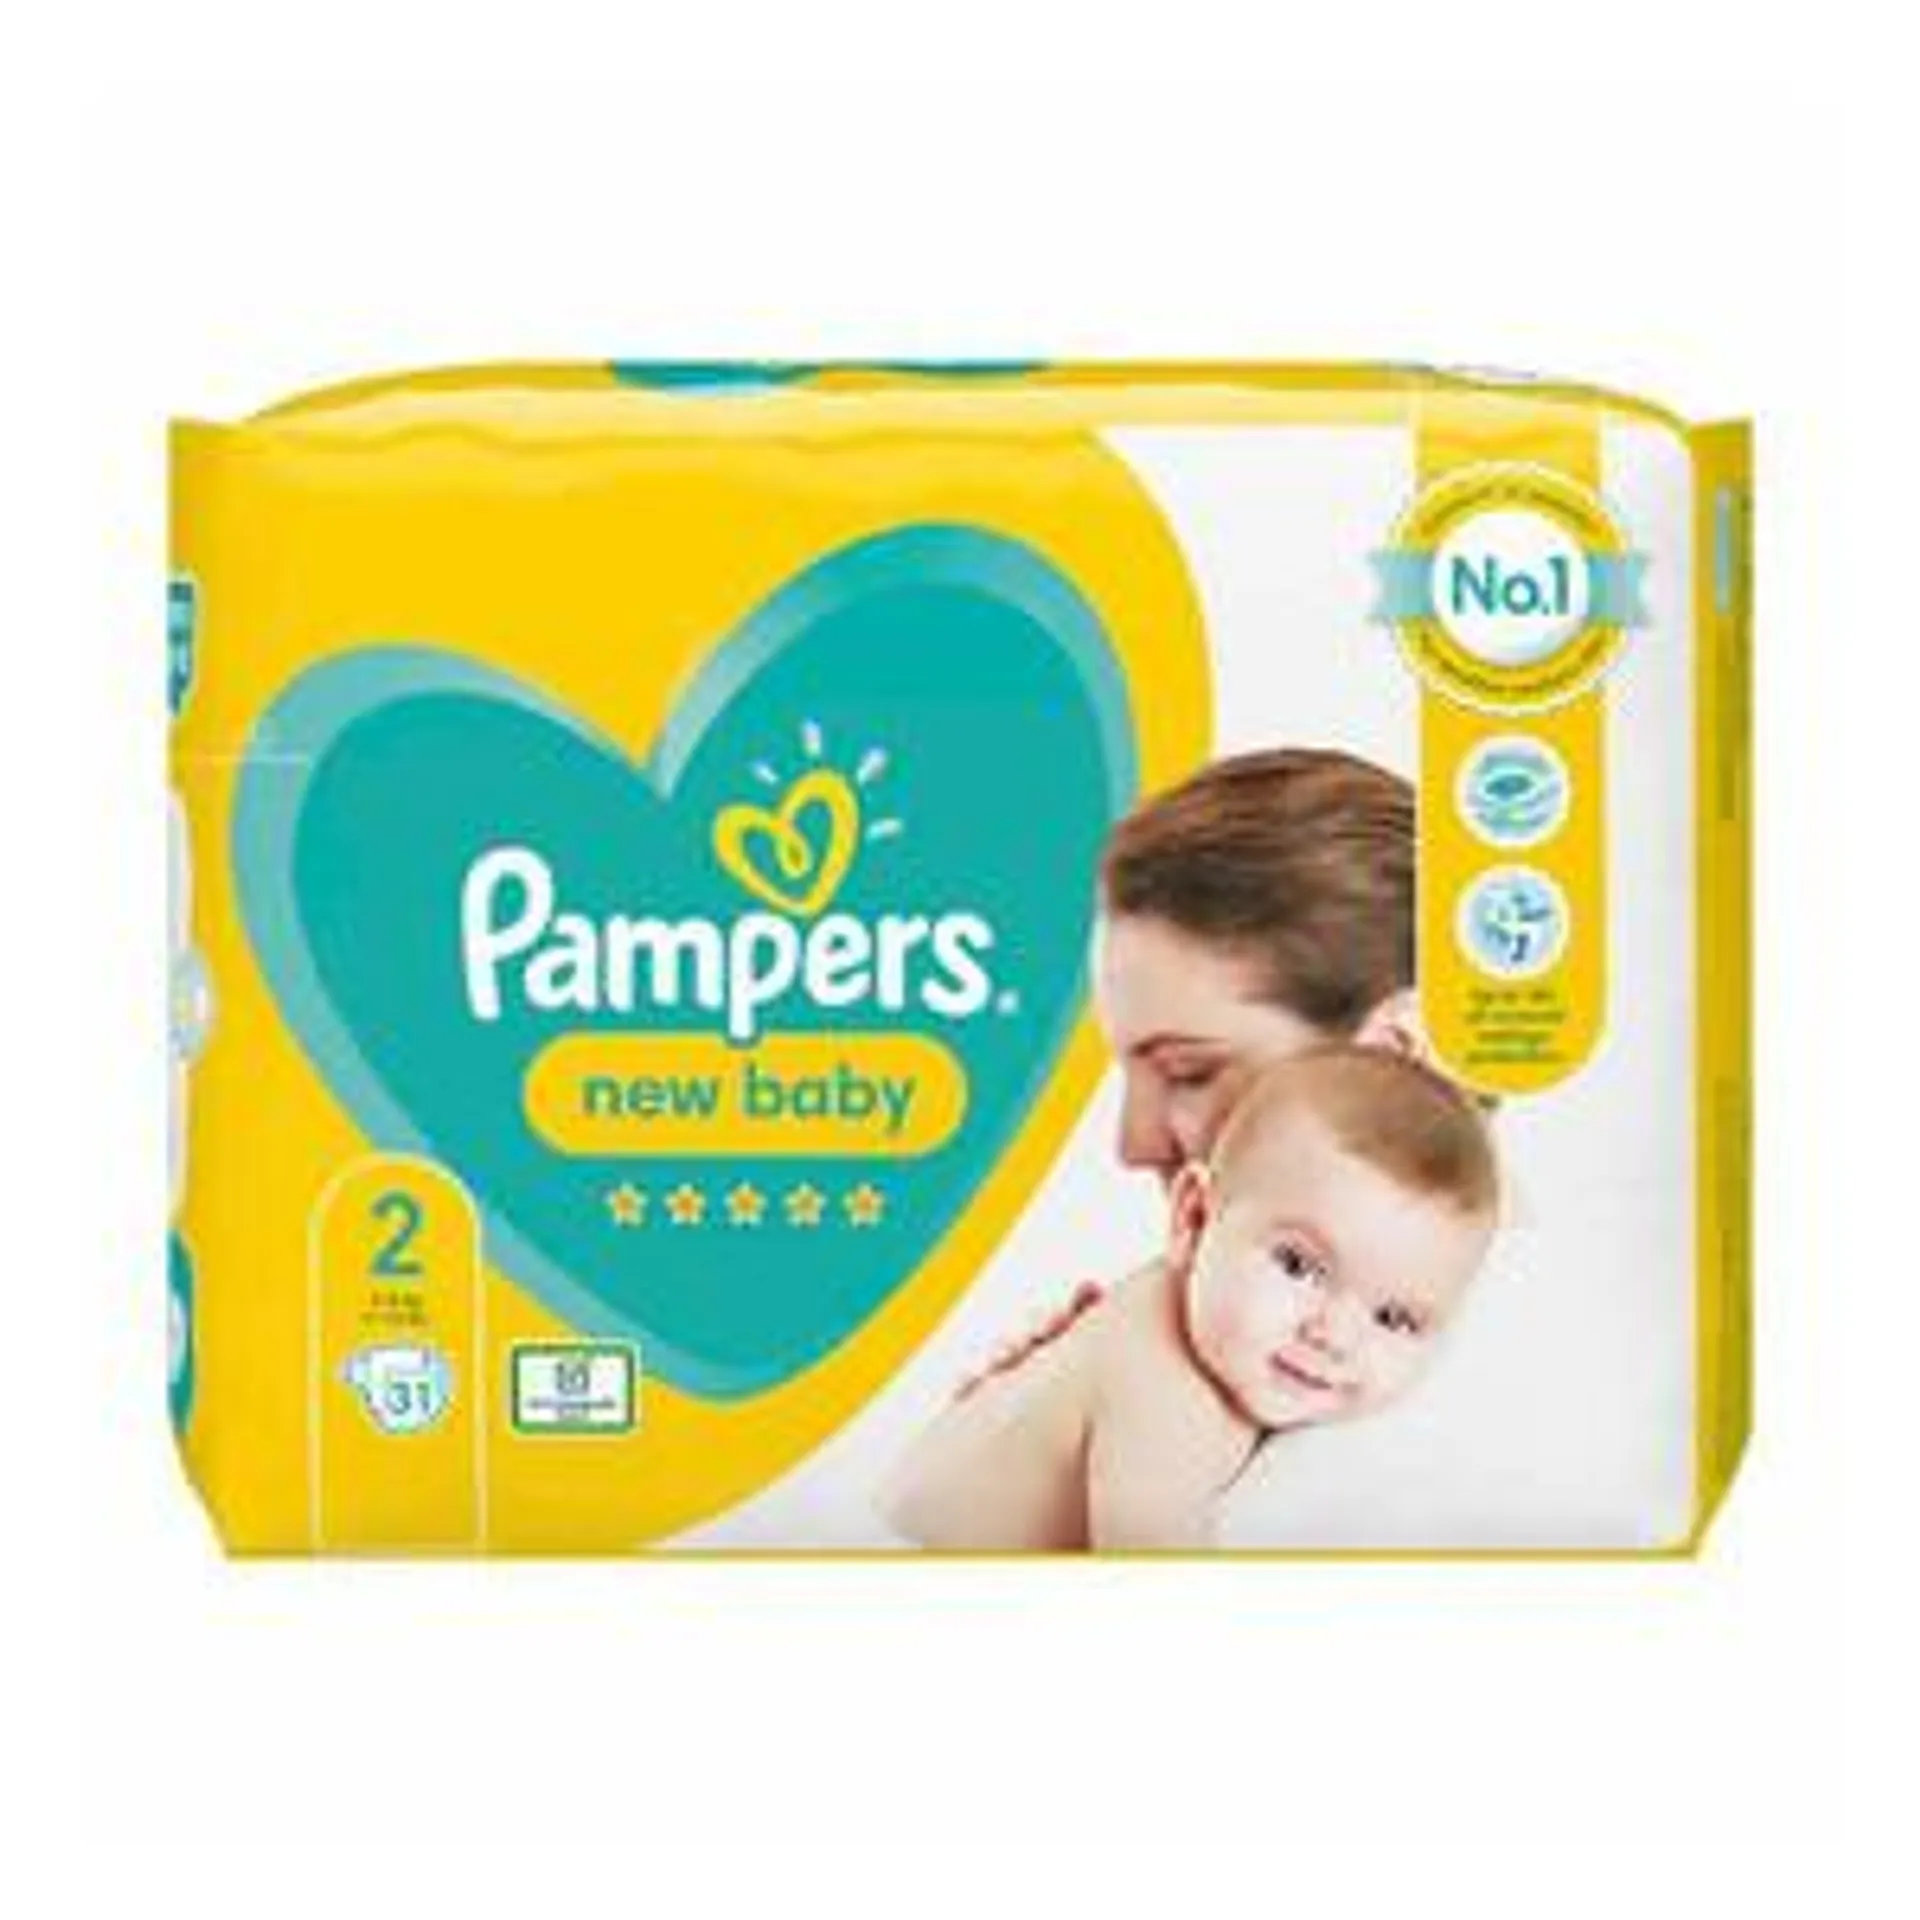 Pampers New Born Size 2 Nappies 31 Pack